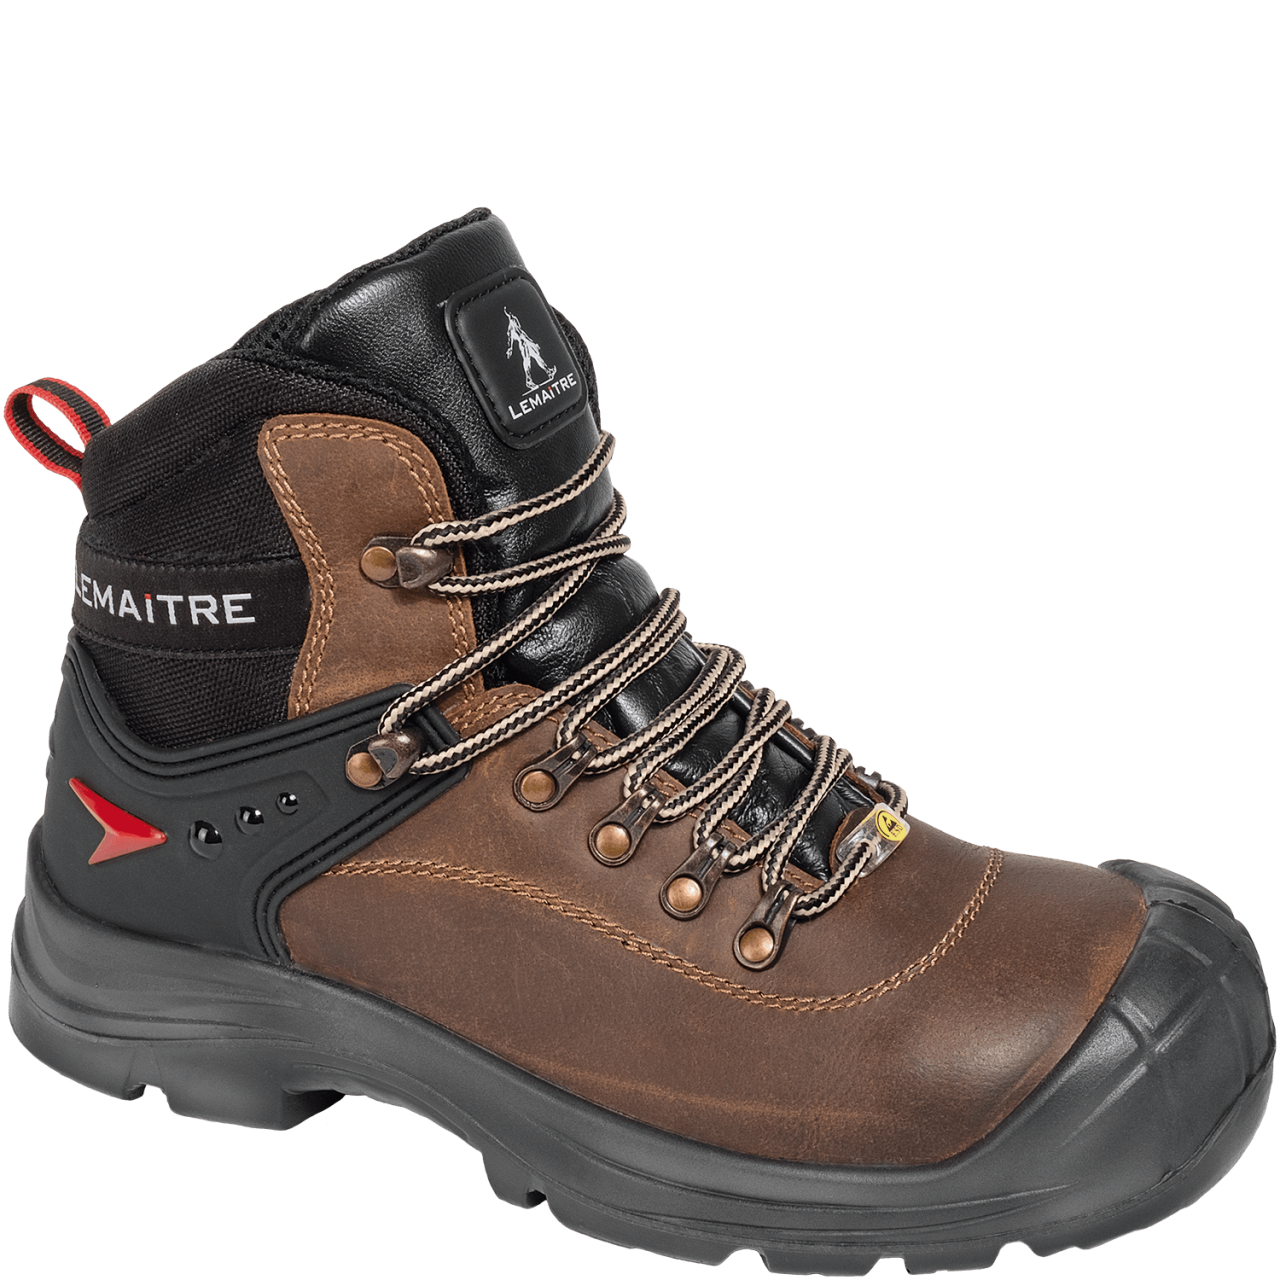 LEMAITRE Slog Brown S3 ESD